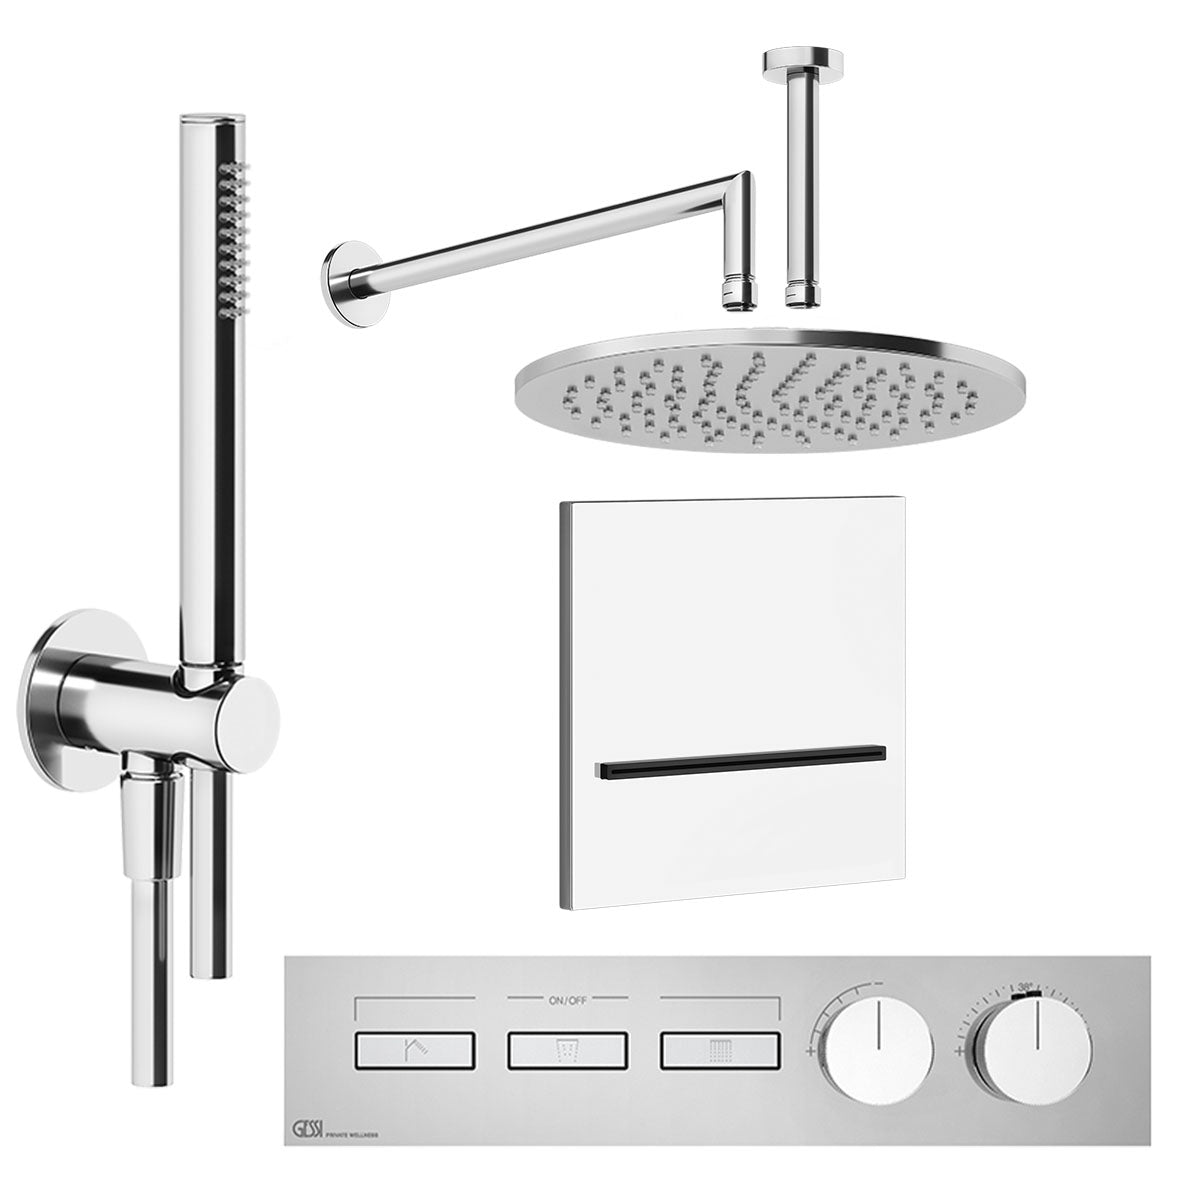 Gessi HiFi 3 Outlet Thermostatic Shower Valve with Fixed Overhead Pencil Handset Shower Spout Chrome